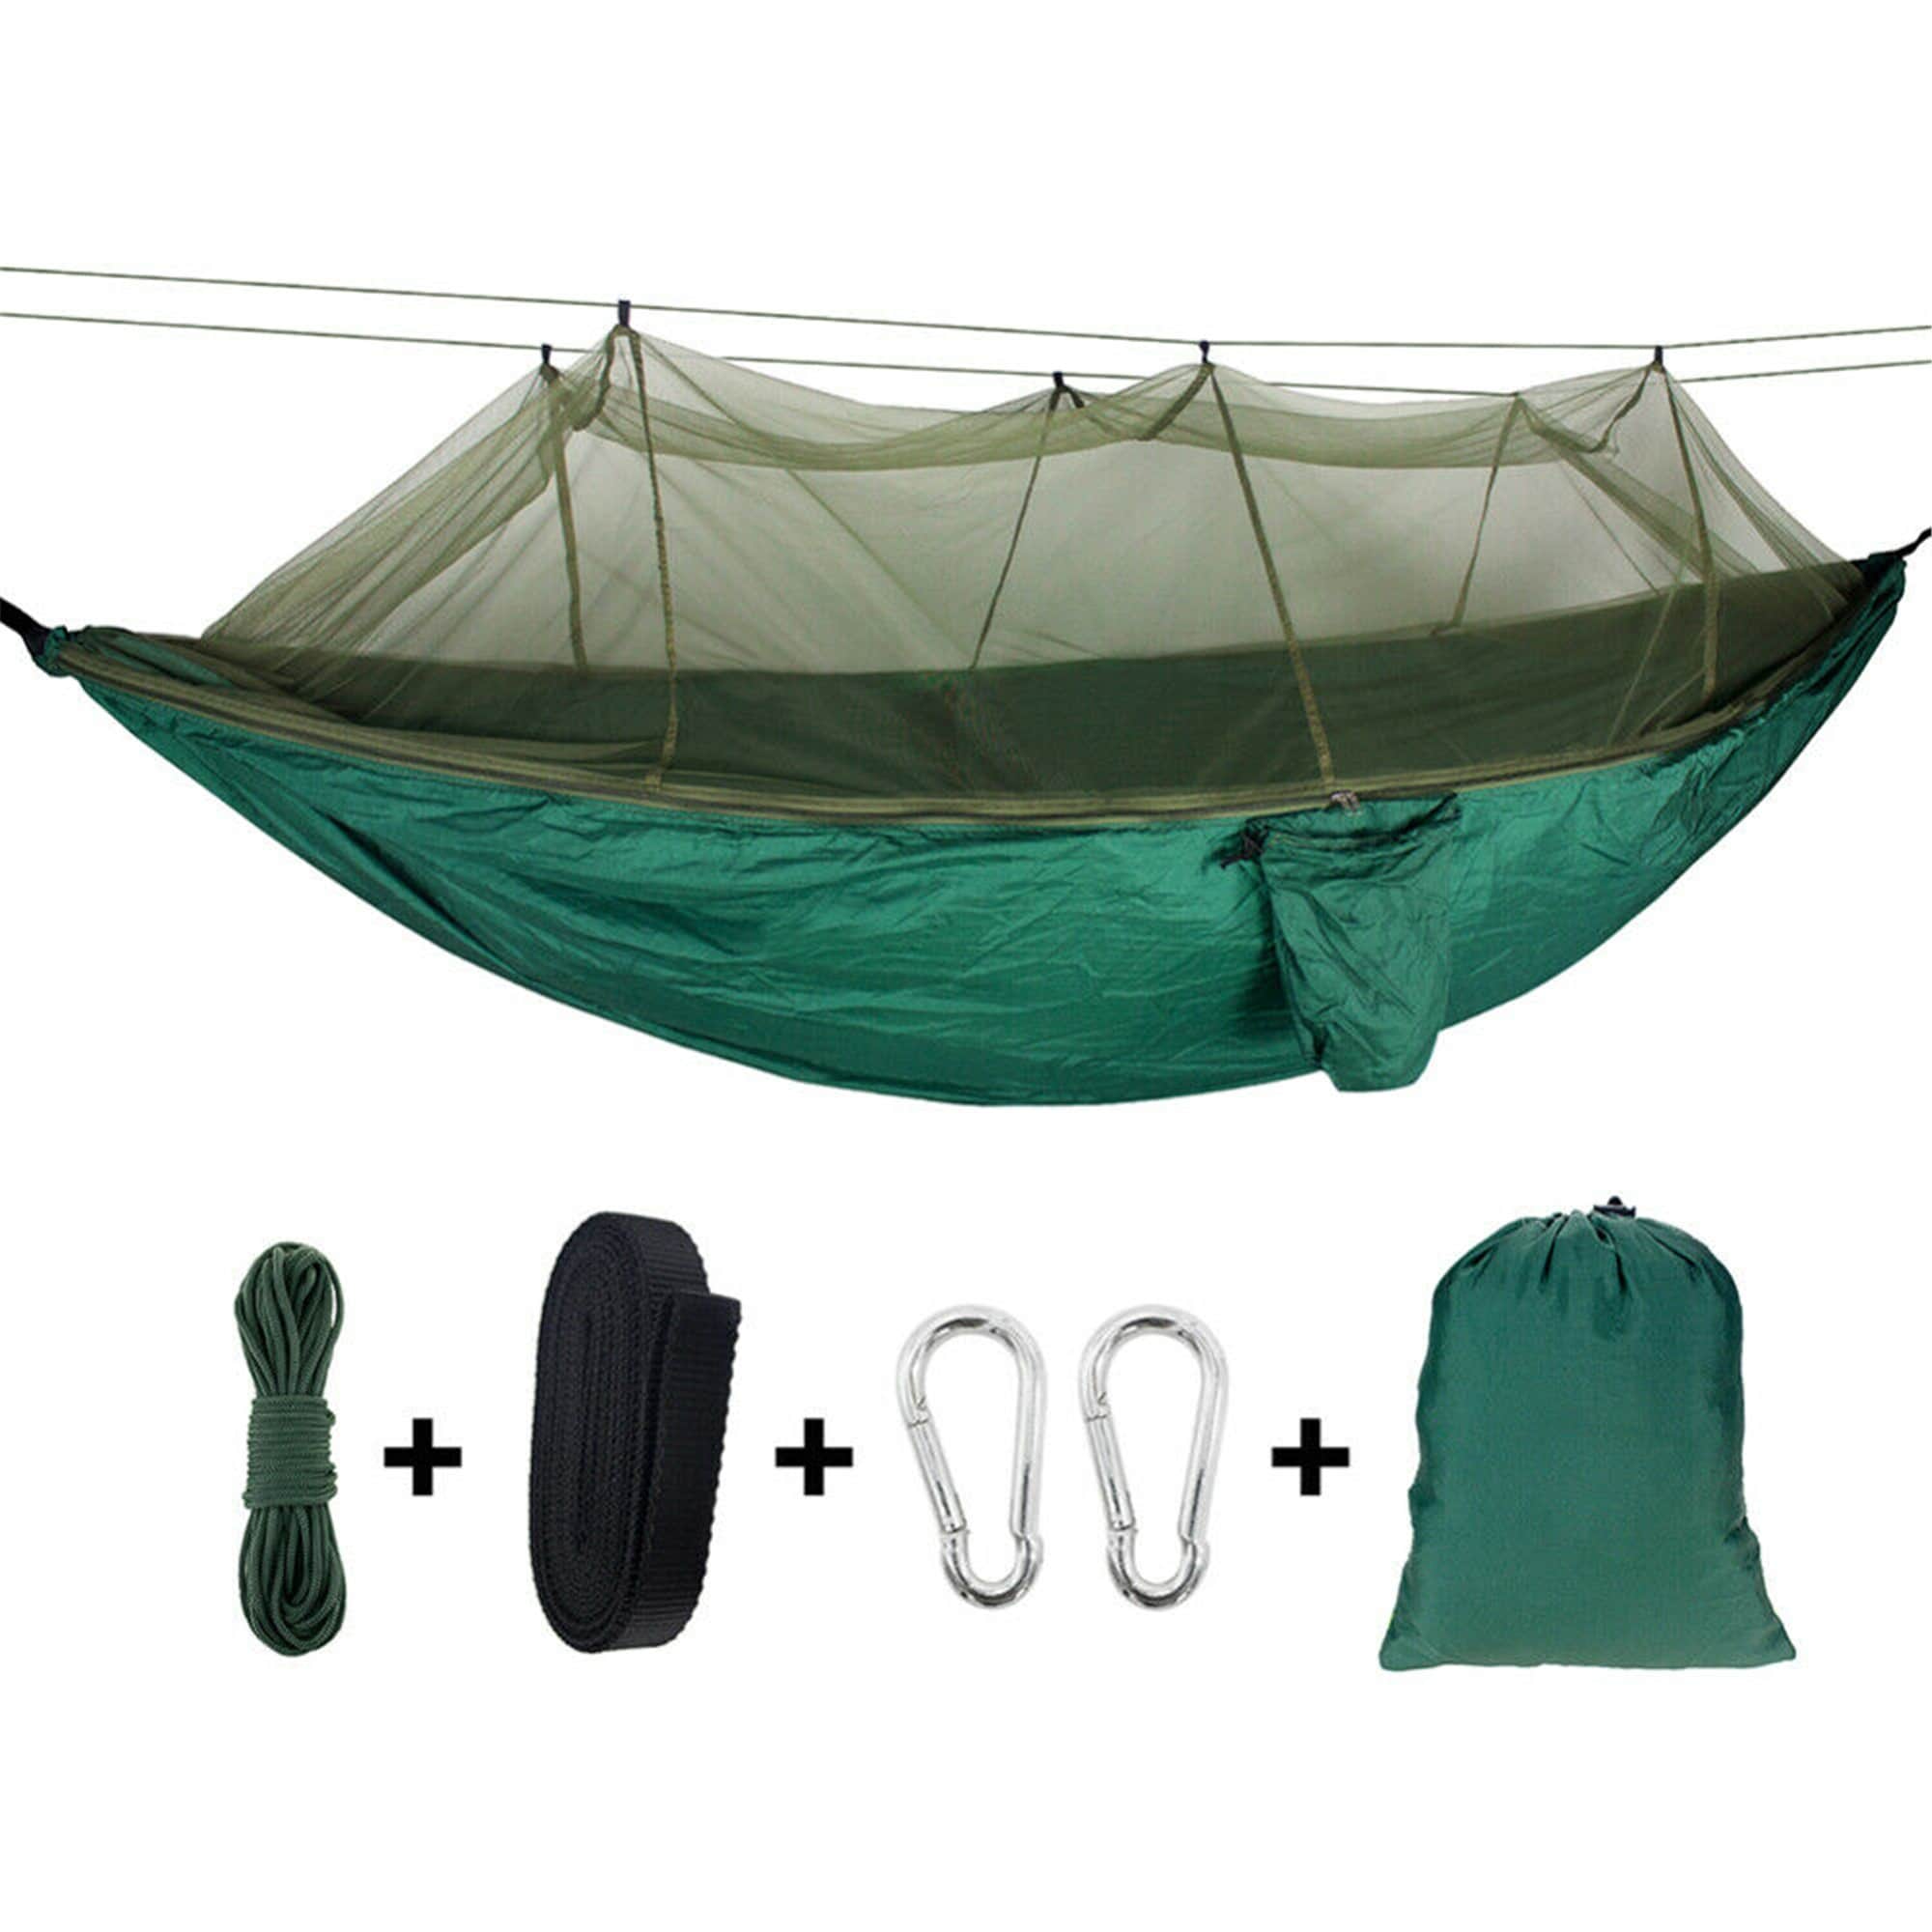 Outdoor Nylon Camping Hiking Mosquito Mesh Net for Double Hammock Hanging Bed 